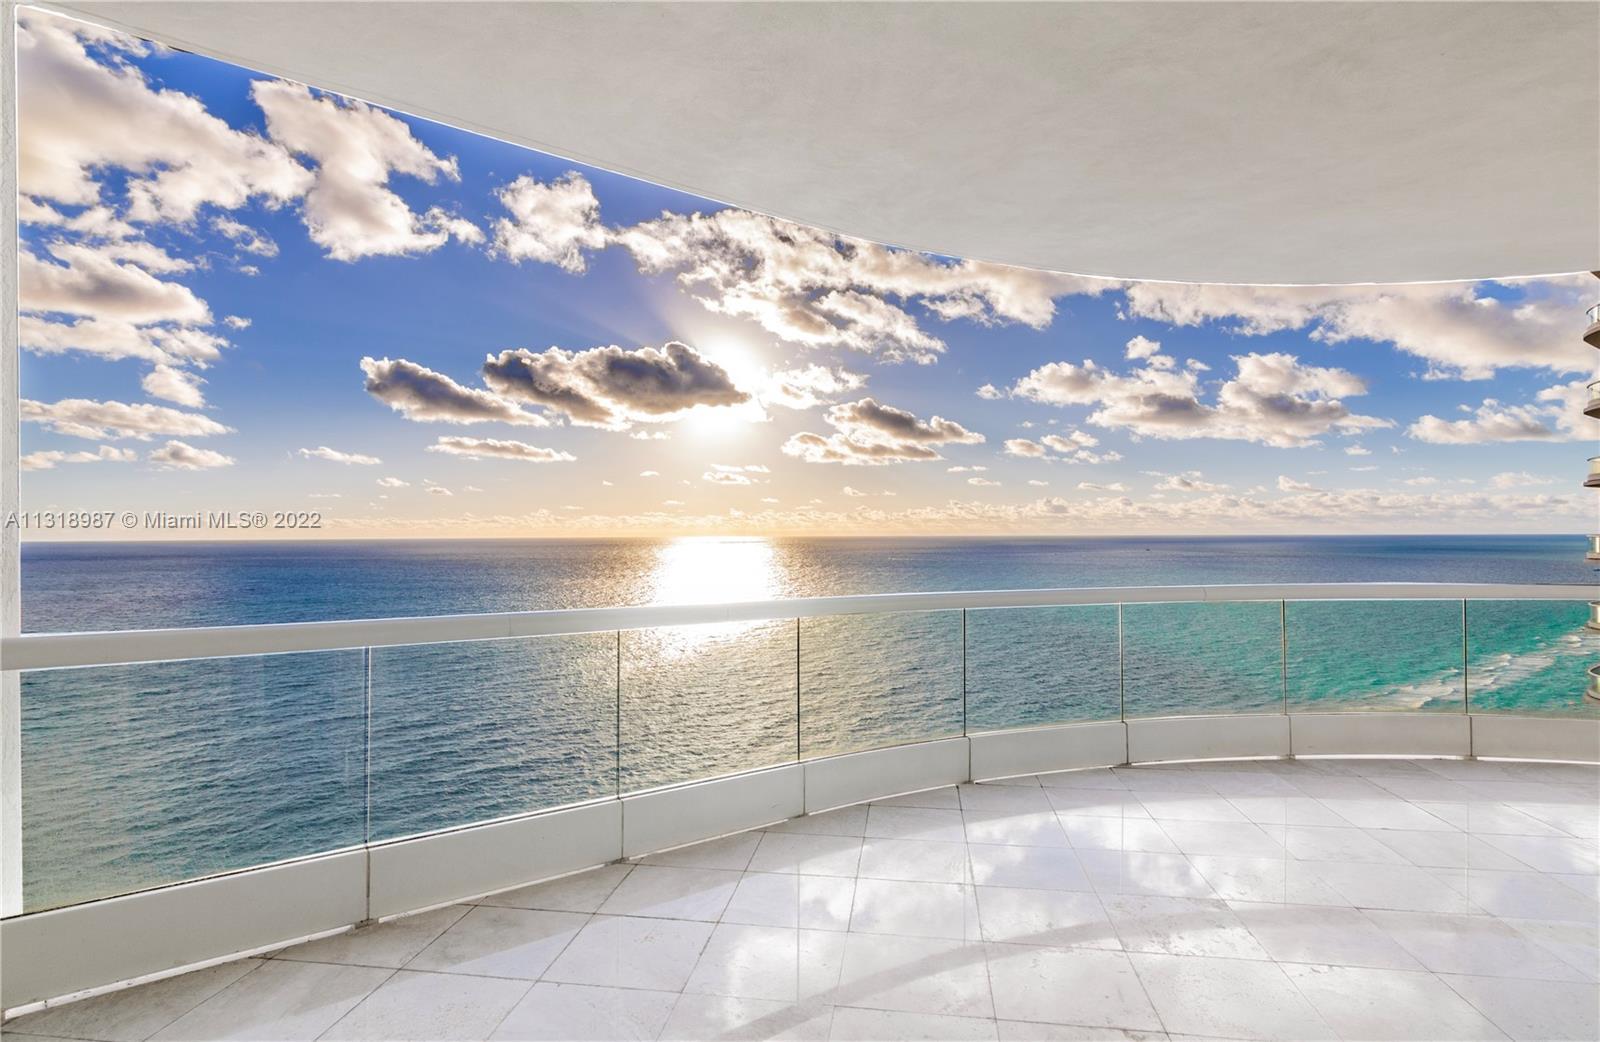 Absolutely stunning mansion in the sky at the luxurious Turnberry Ocean Colony. Remarkable residence